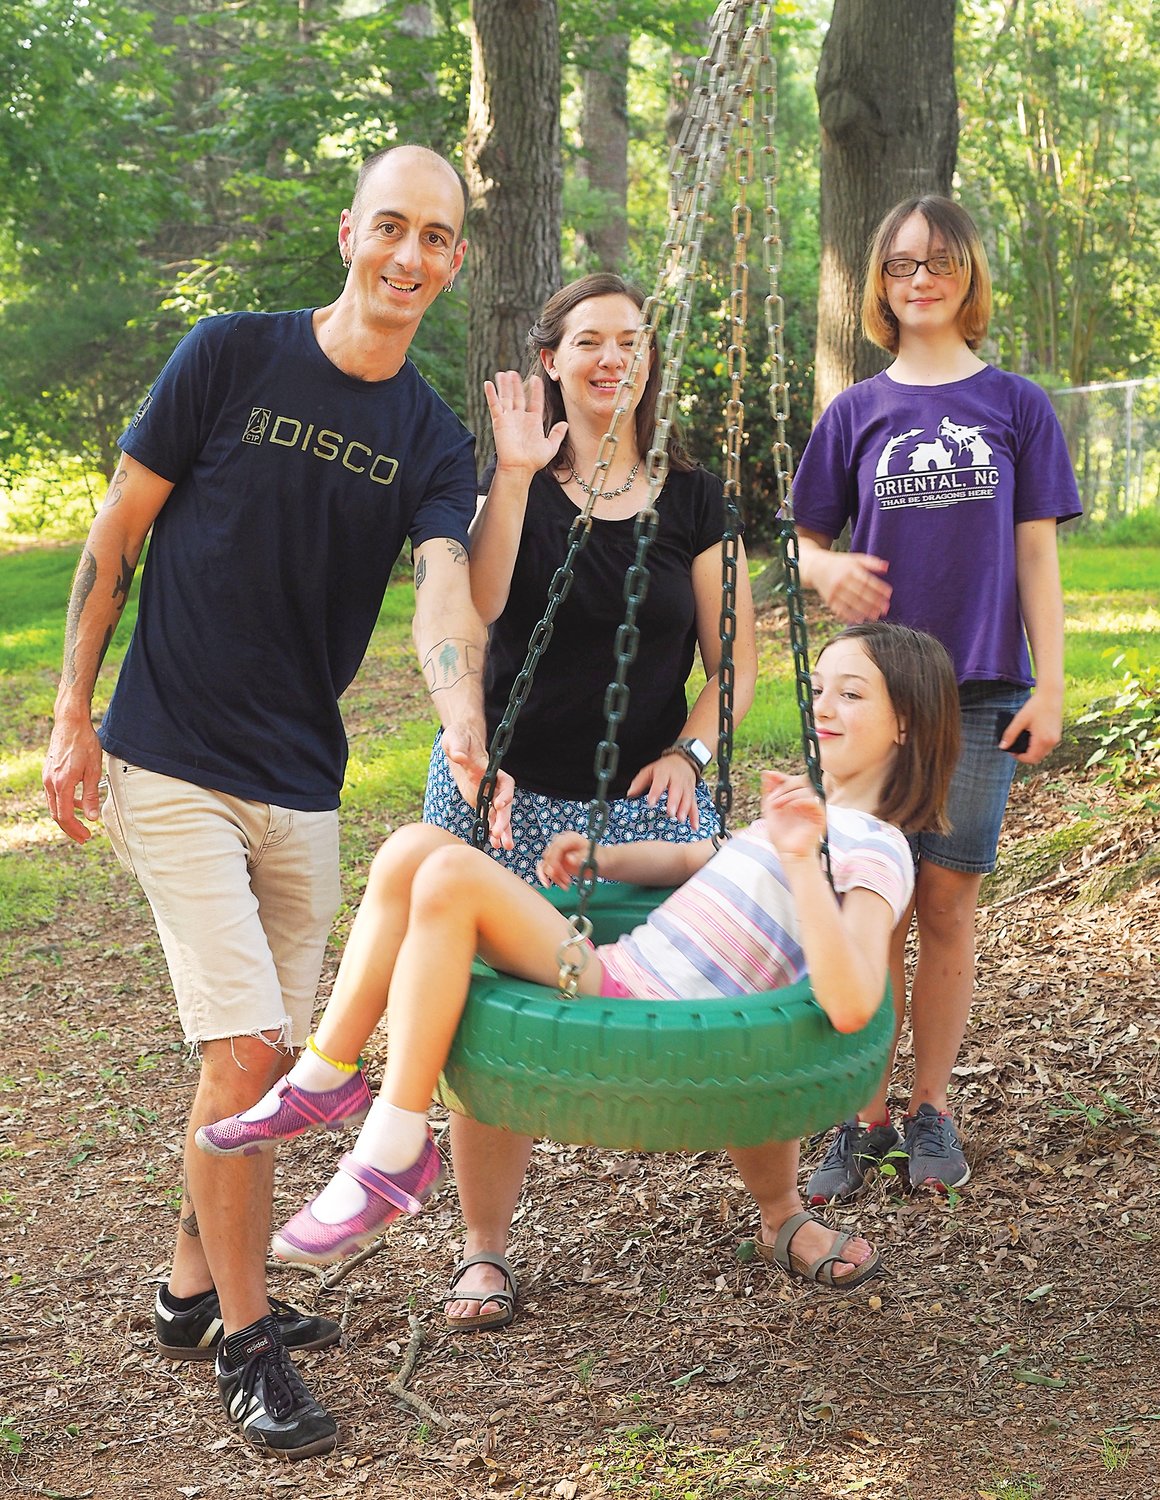 Corbie Hill poses with wife Rachel and their daughters, Sarah (right) and Lucy (in striped shirt).